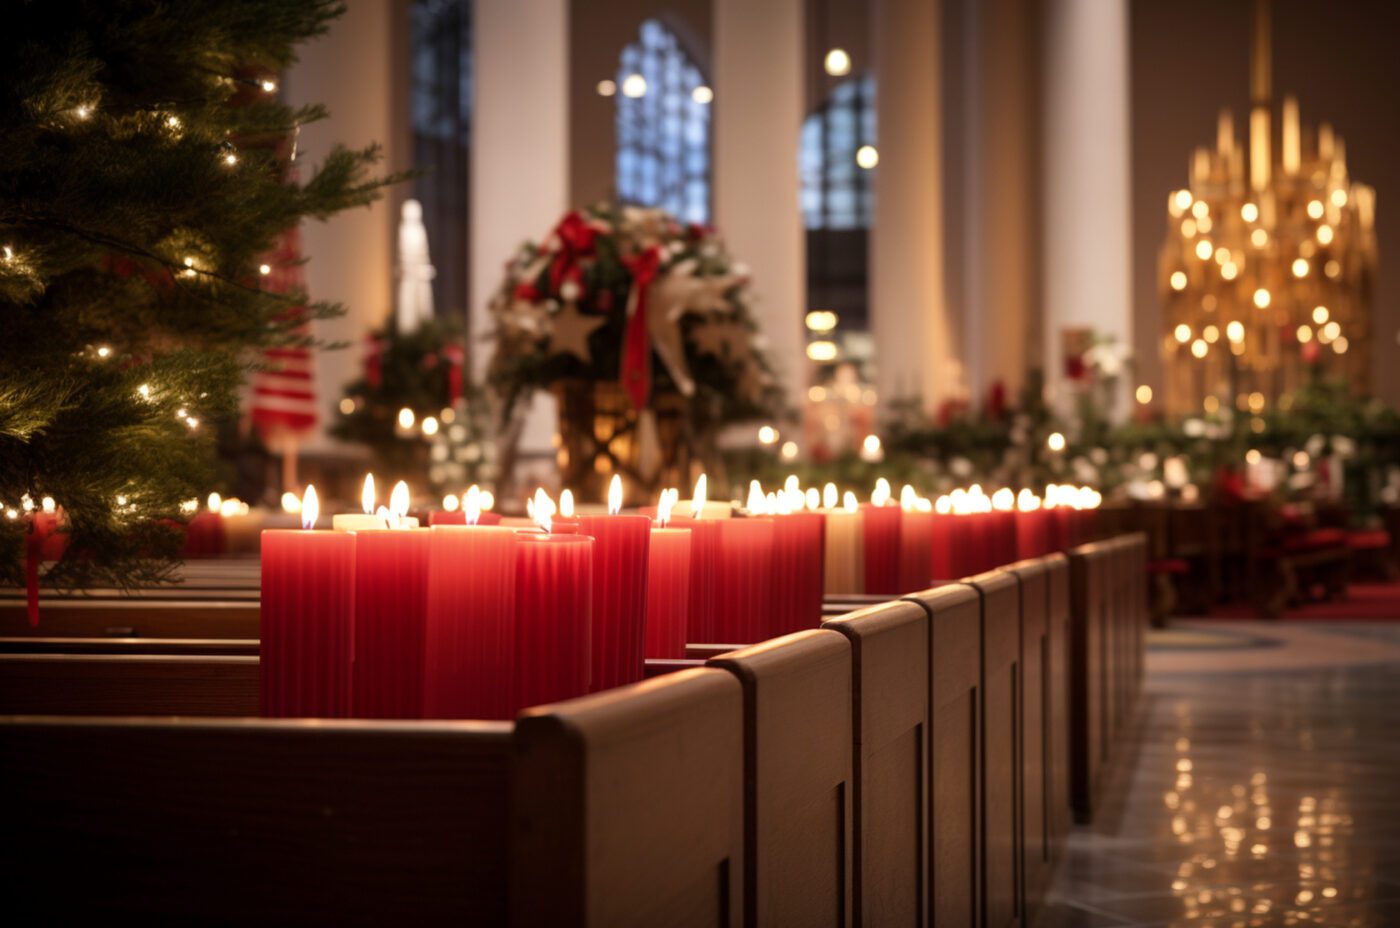 Candlelit Christmas Eve Church Service with Peaceful Atmosphere , Christmas Eve